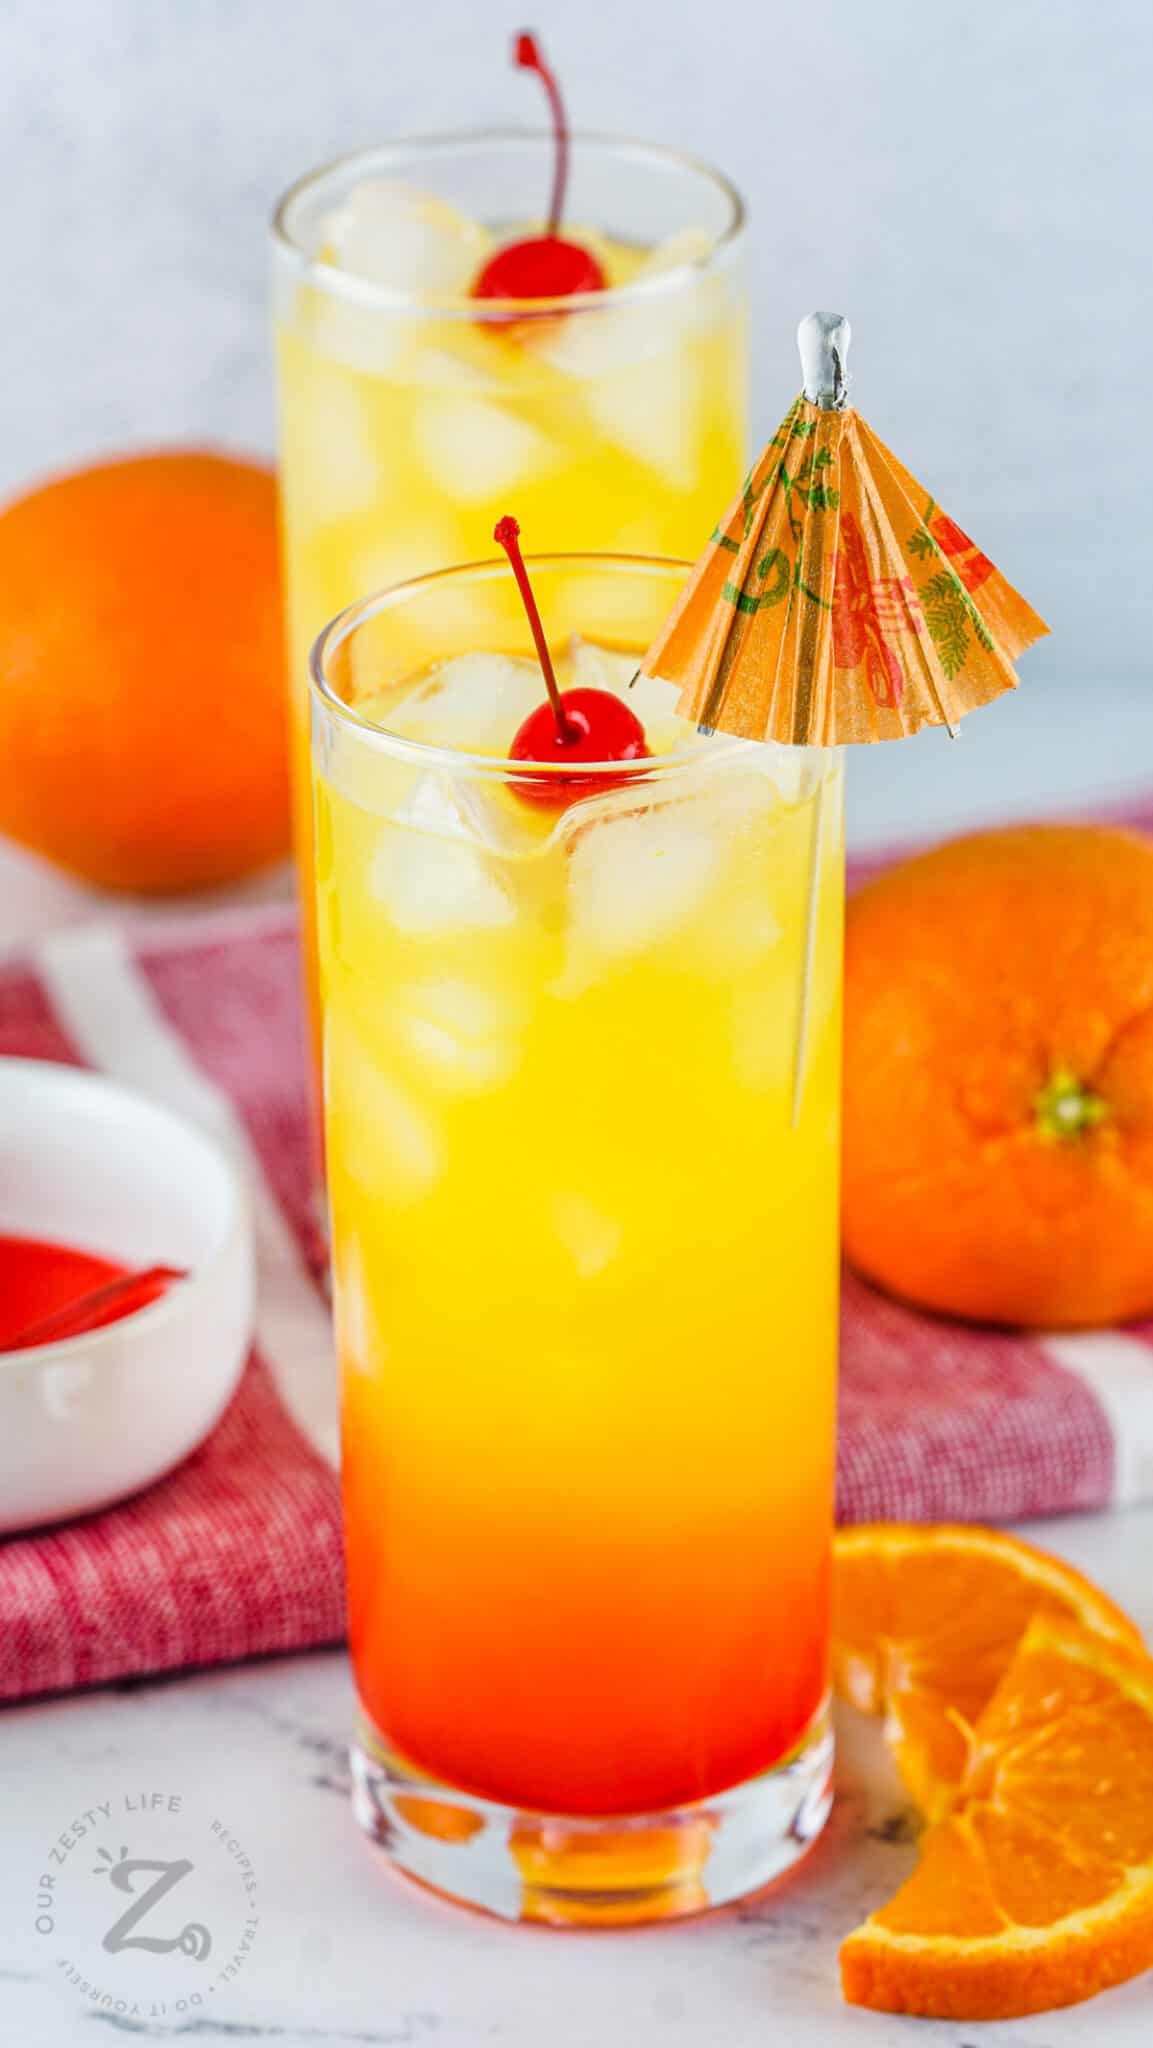 Tequila Sunrise (3 Ingredients!) - Our Zesty Life